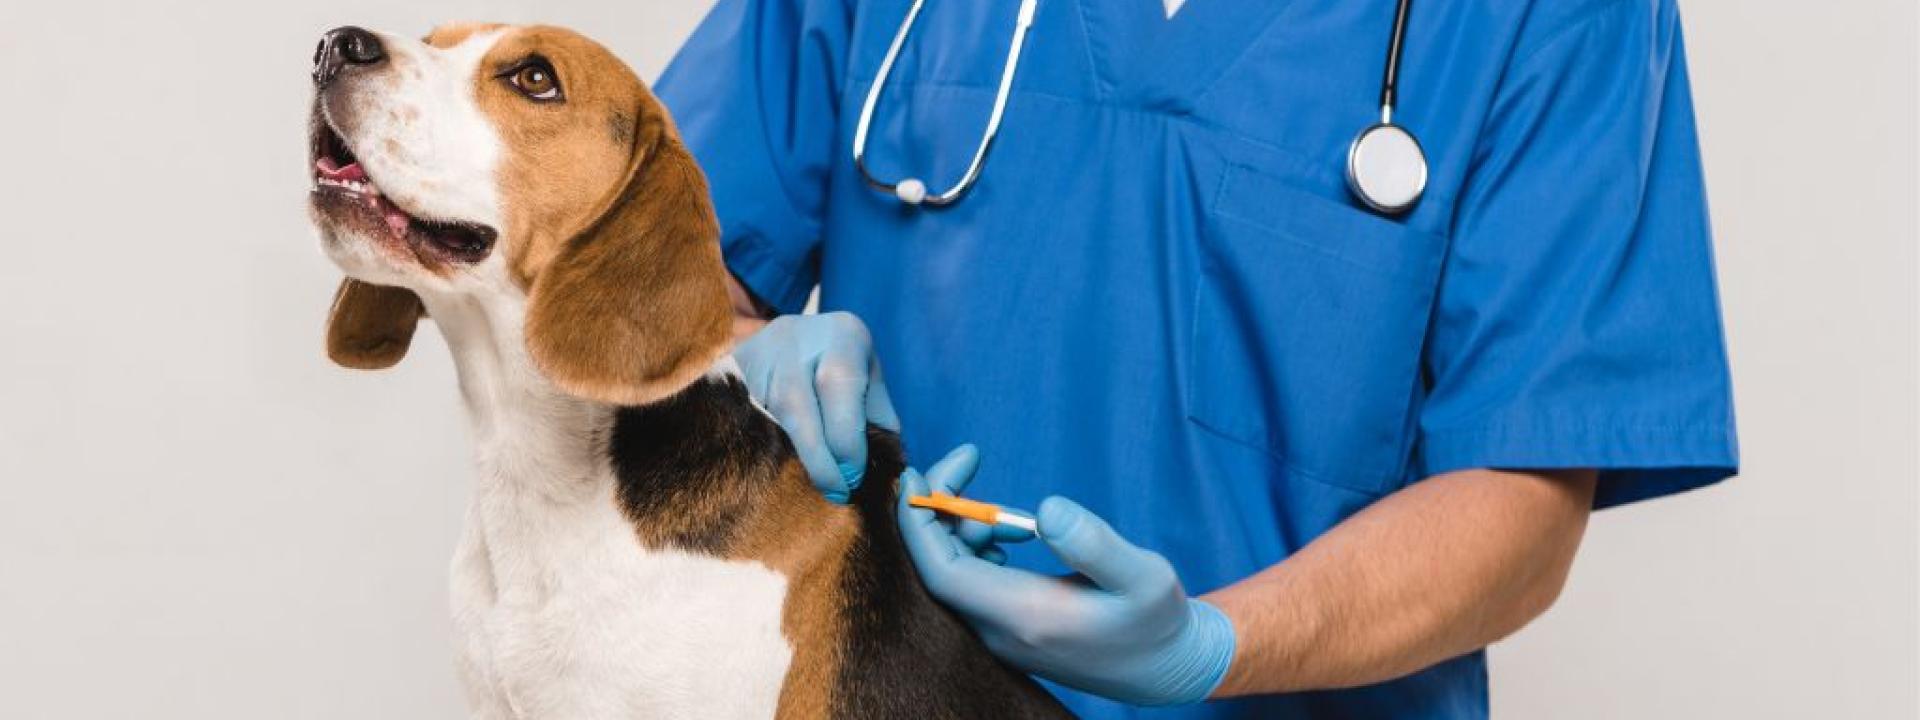 veterinarian microchipping beagle dog with syringe